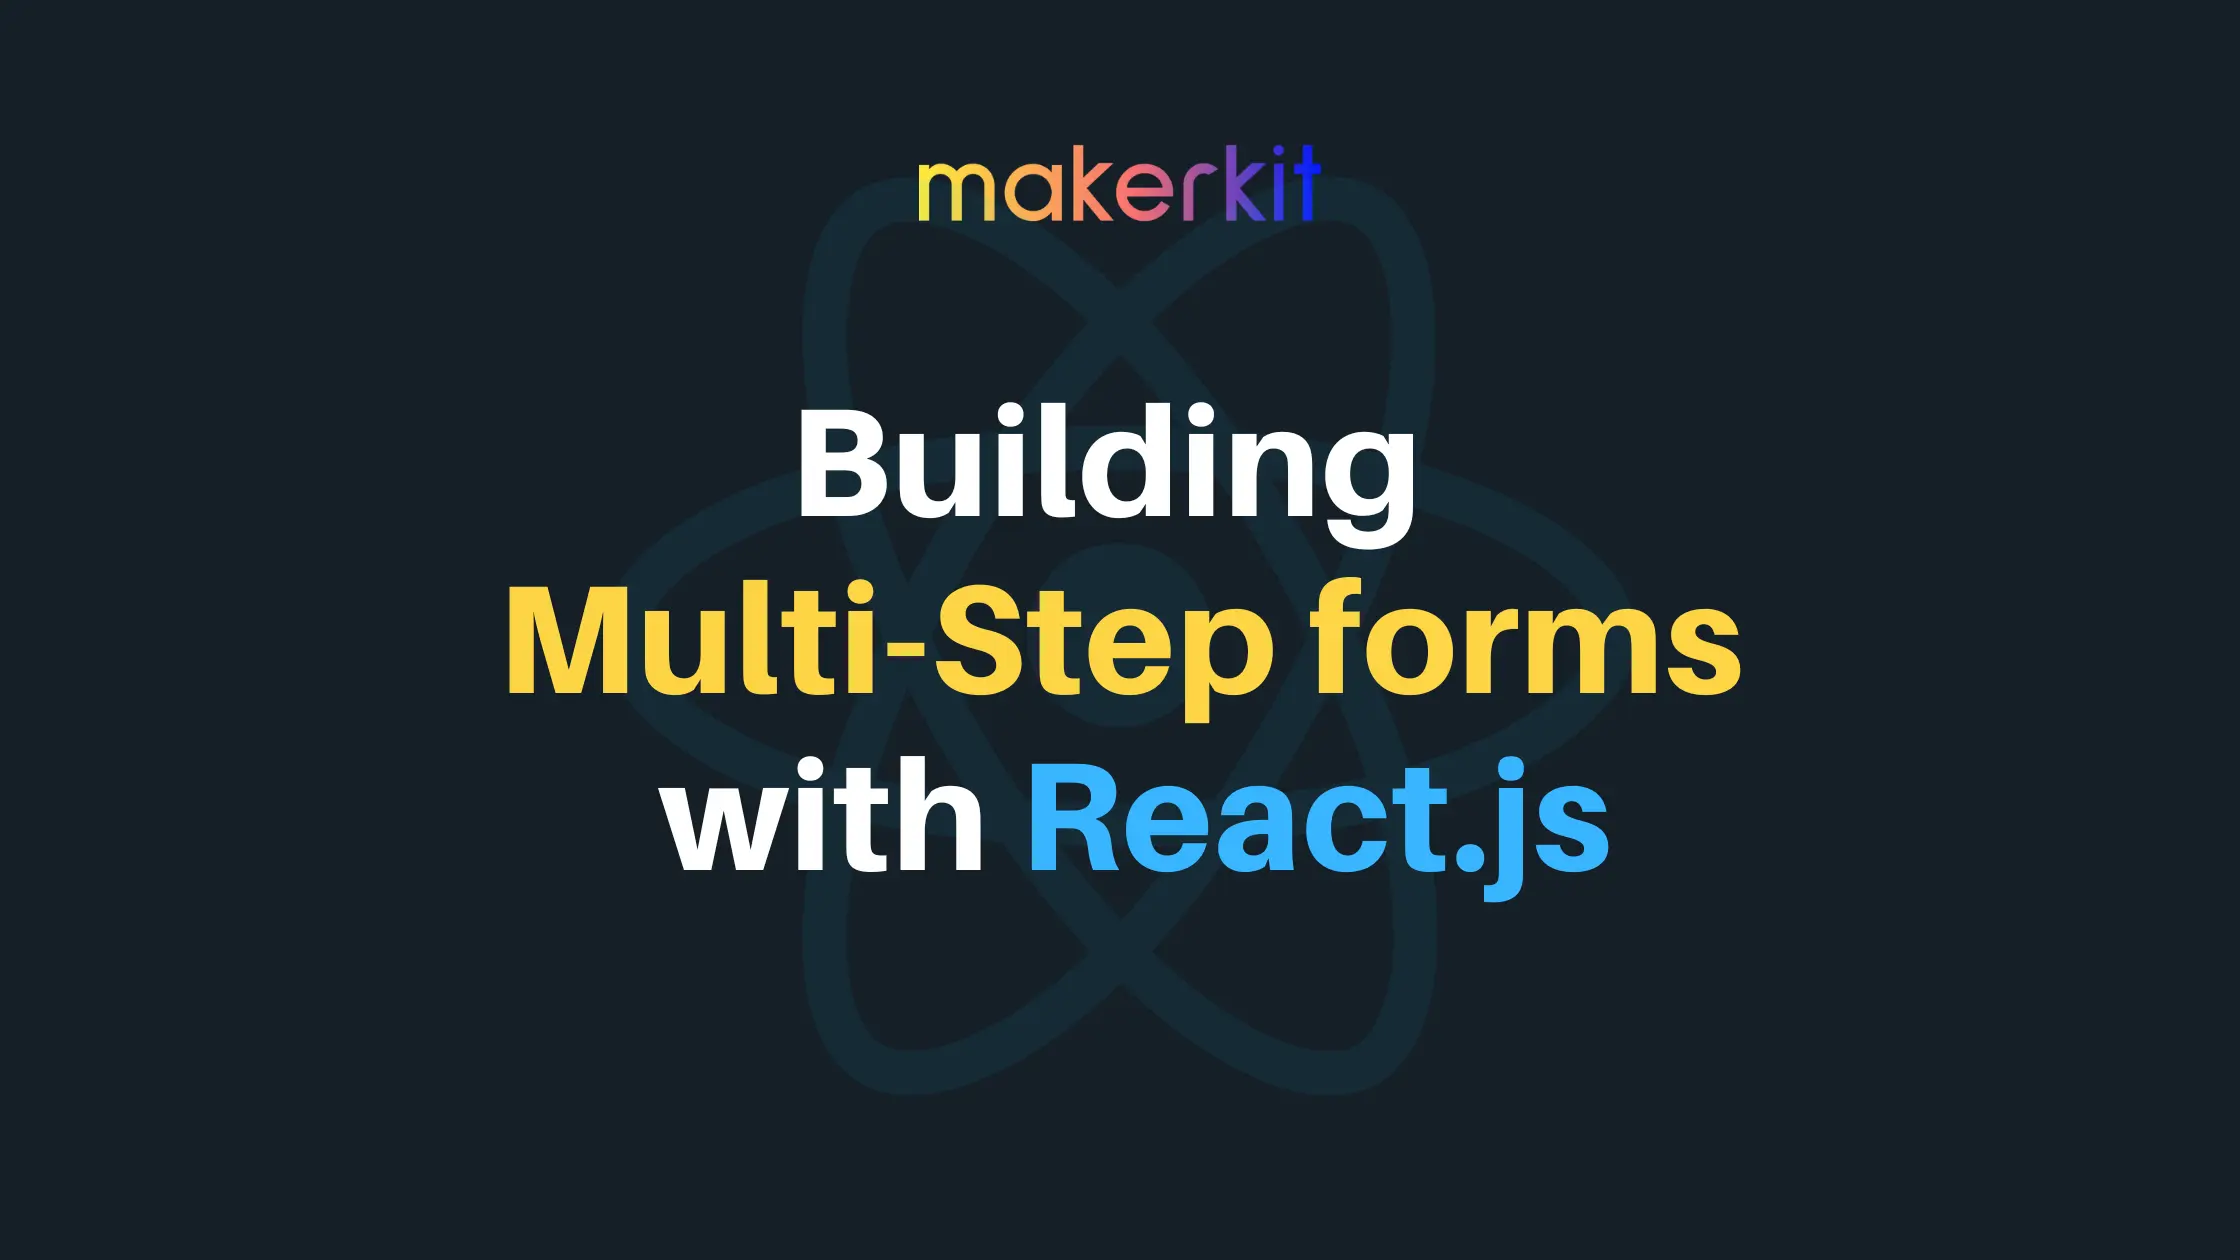 Cover Image for Building Multi-Step forms with React.js